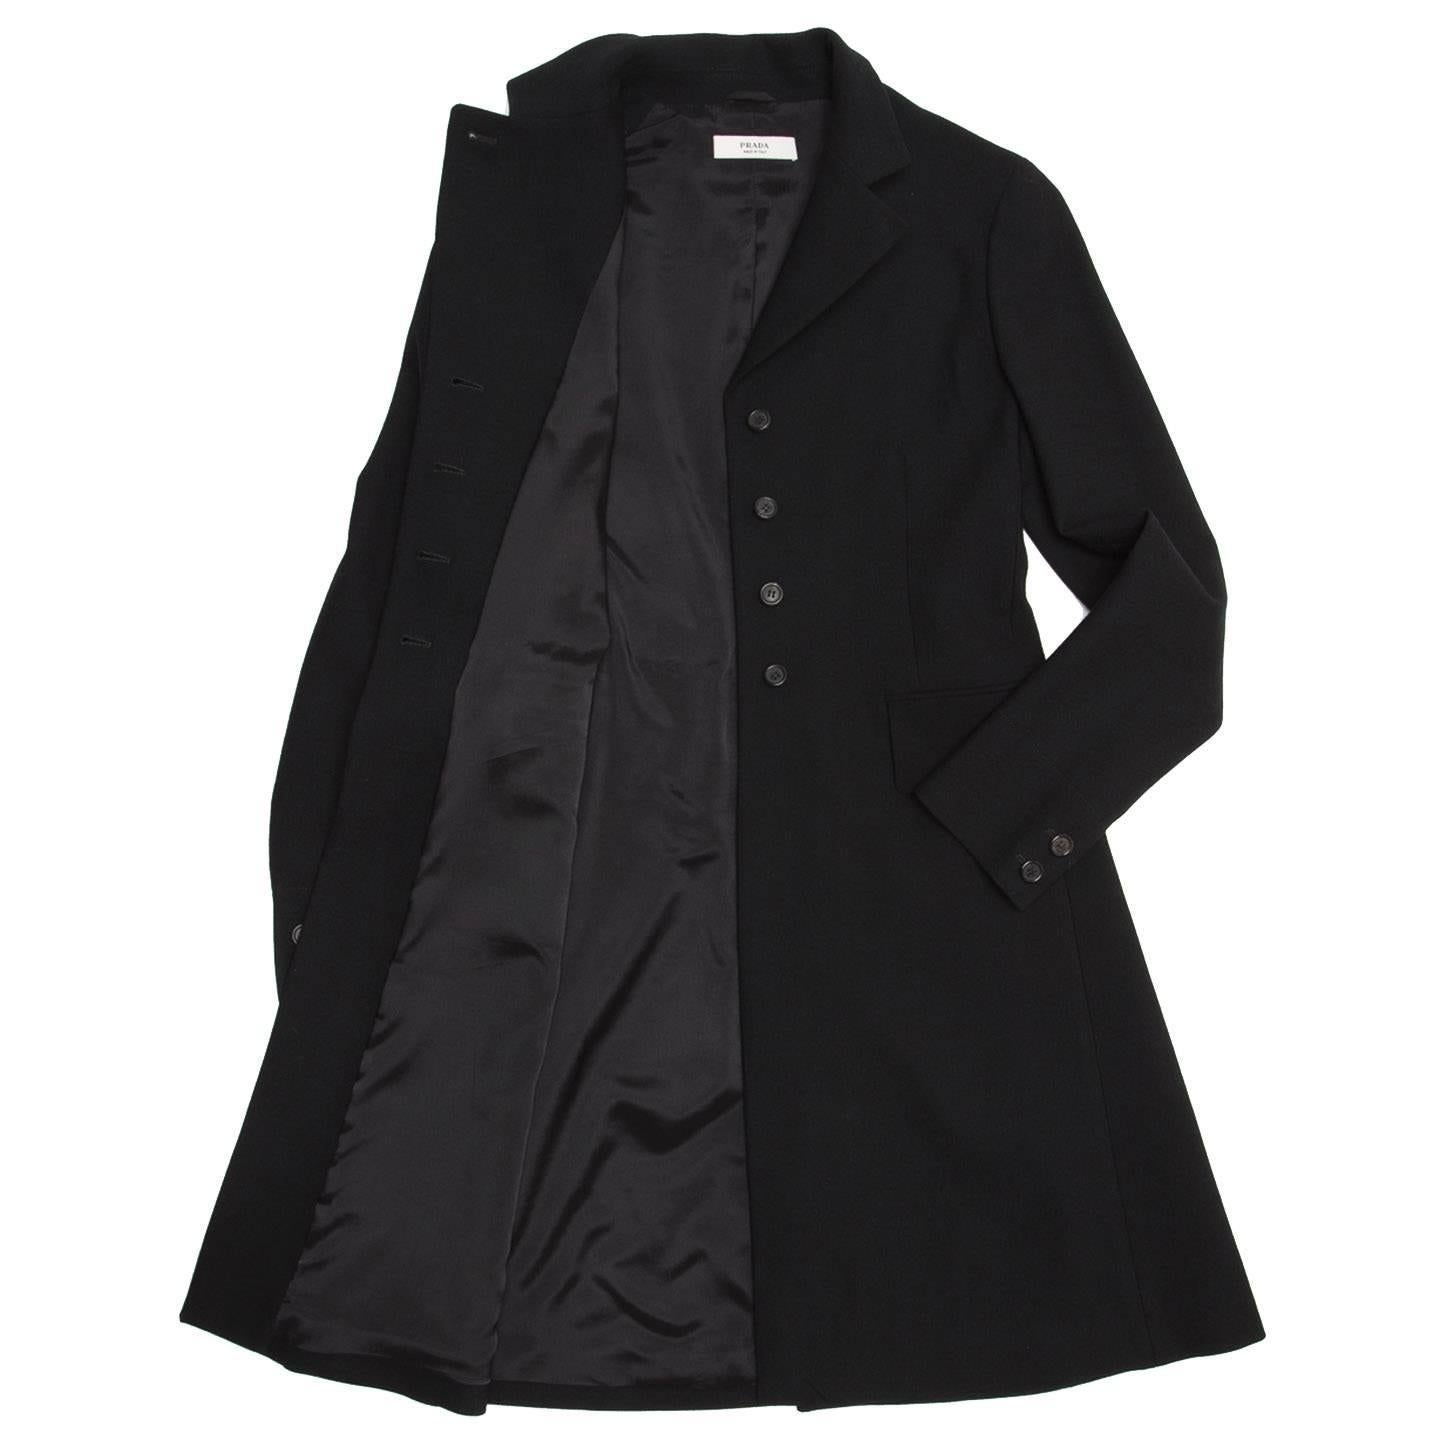 Prada Black Wool Riding Style Coat In Excellent Condition For Sale In Brooklyn, NY